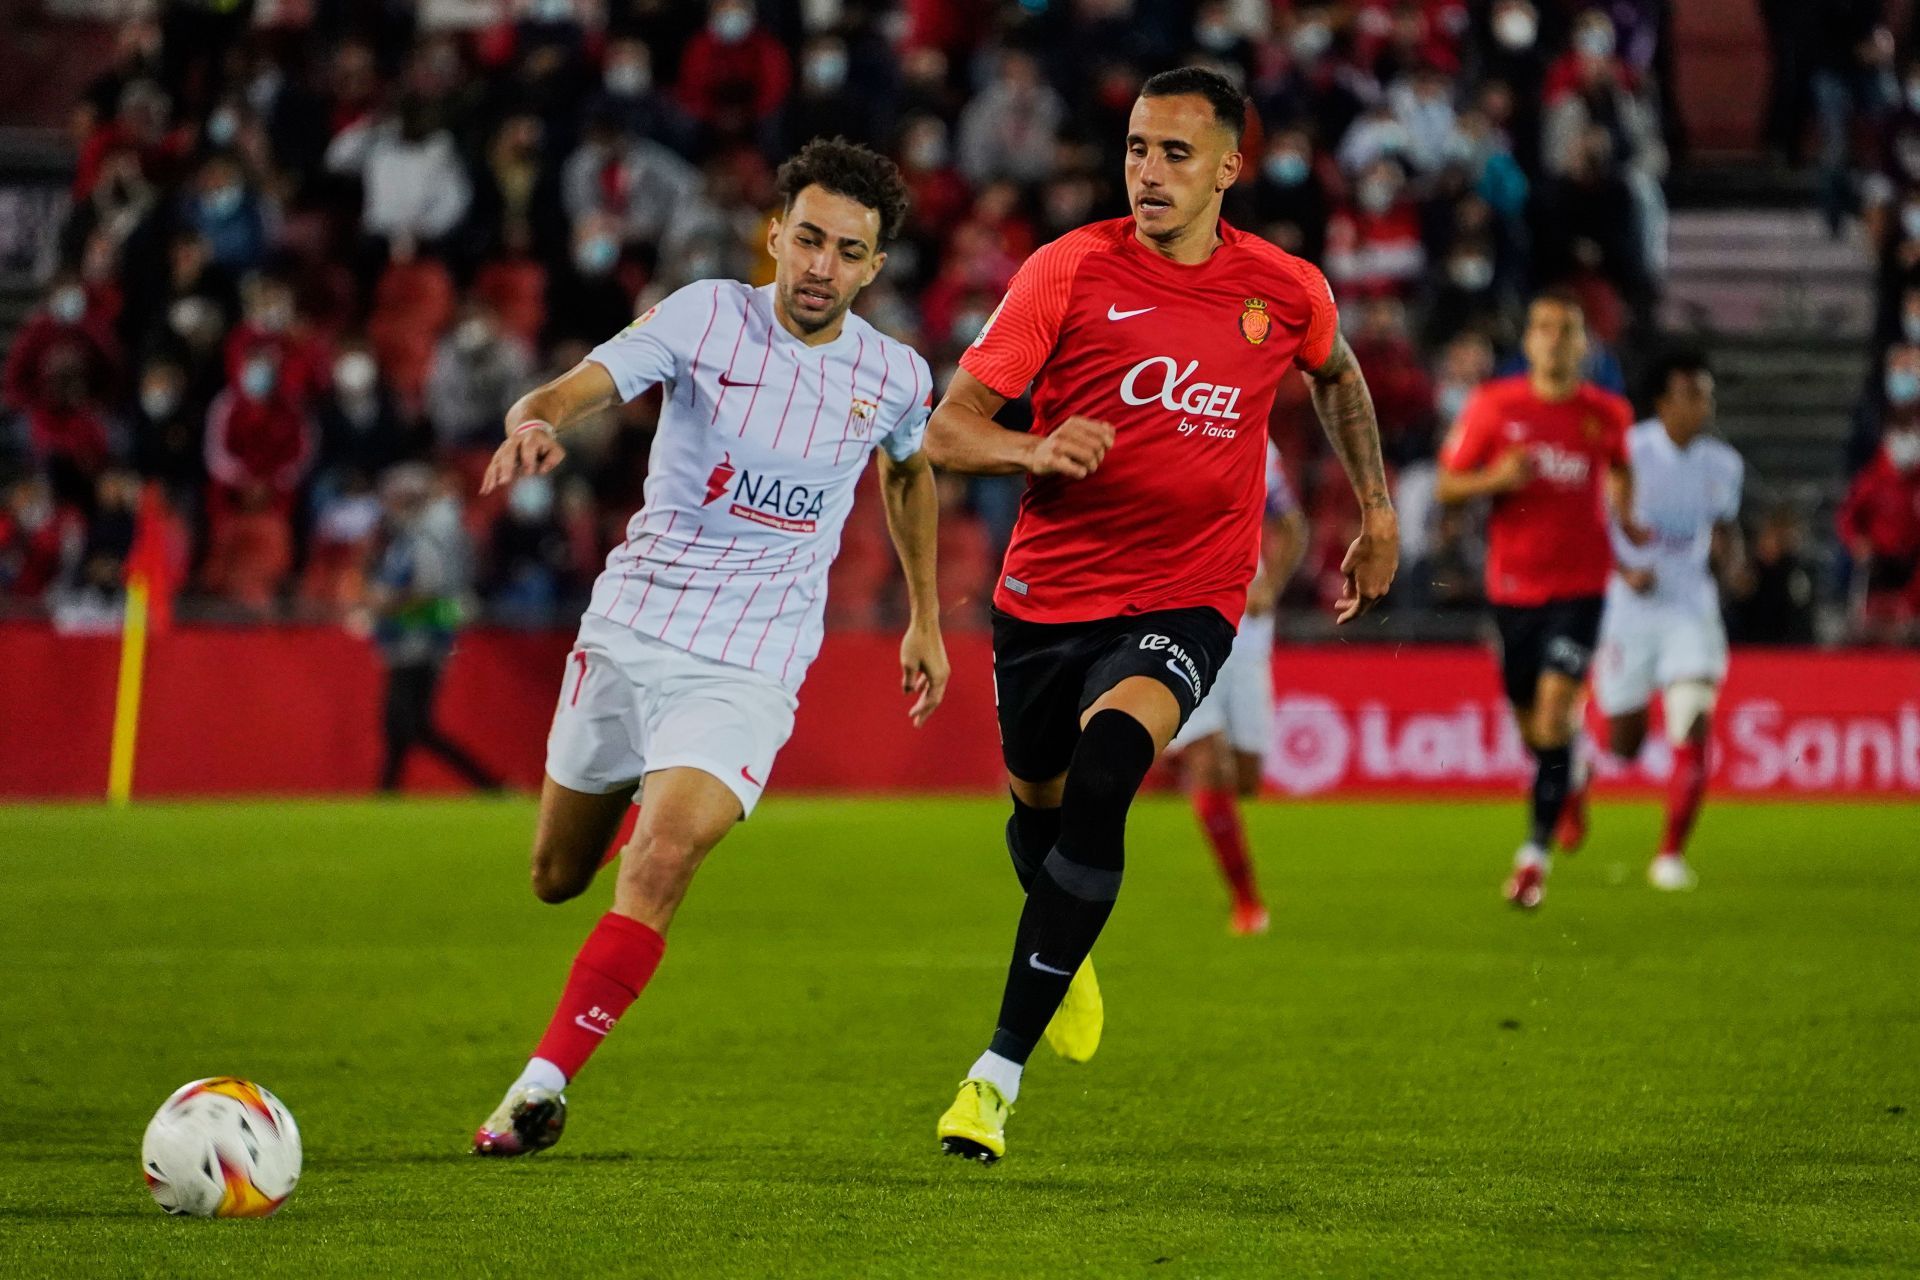 Sevilla are looking to avoid a third consecutive draw